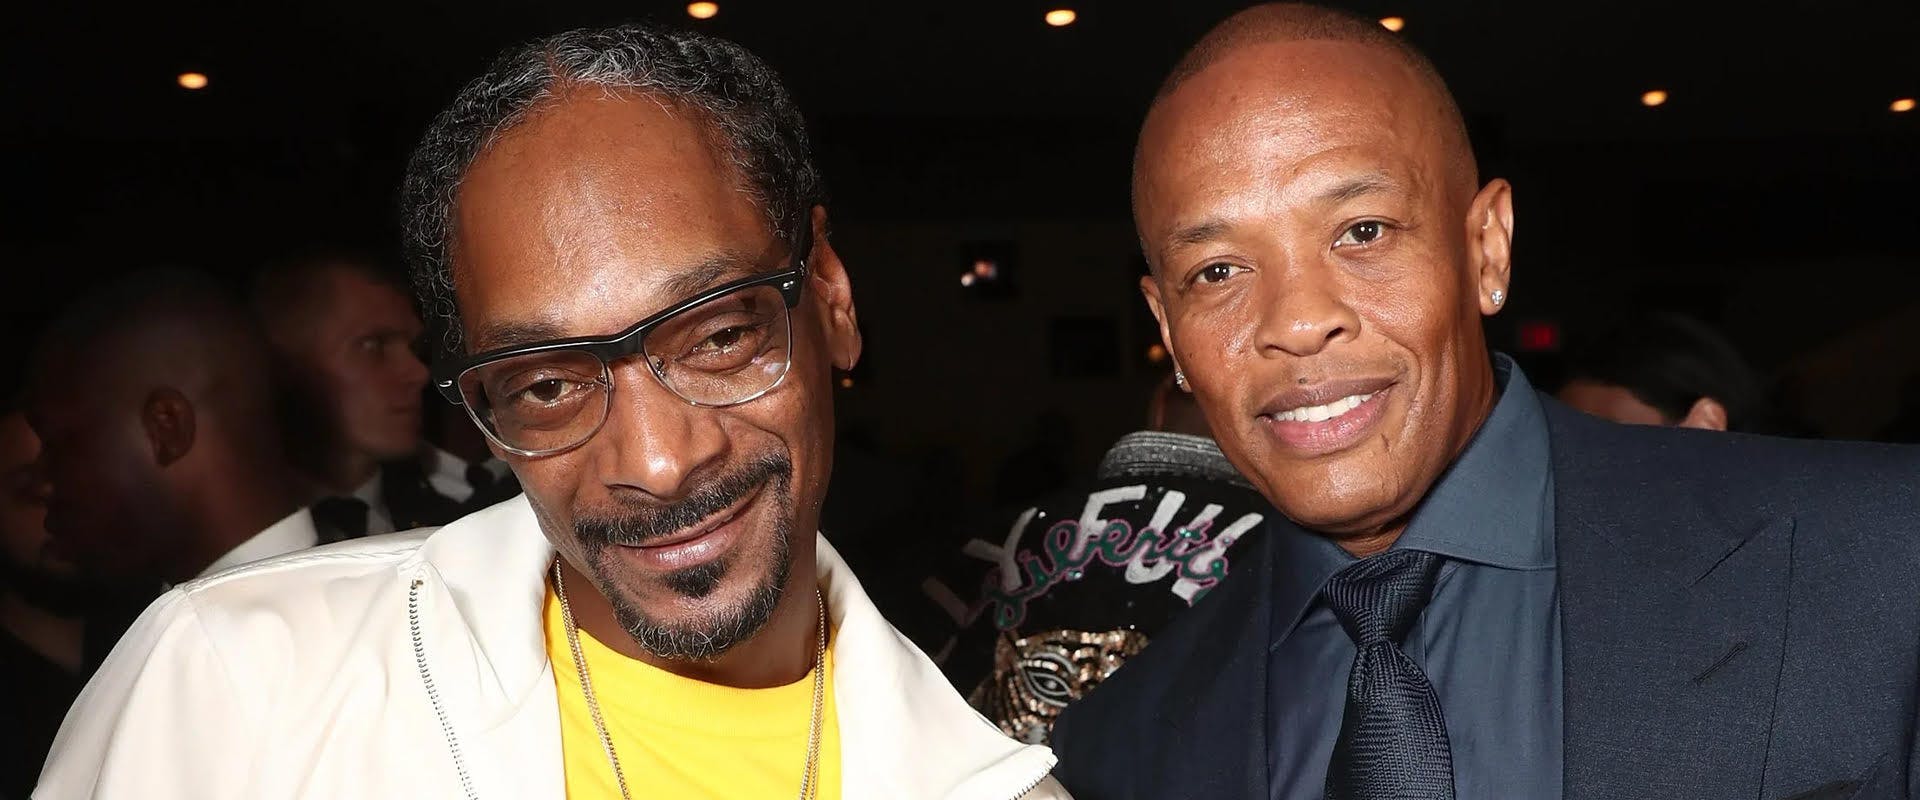 Snoop Dogg and Dre Dre